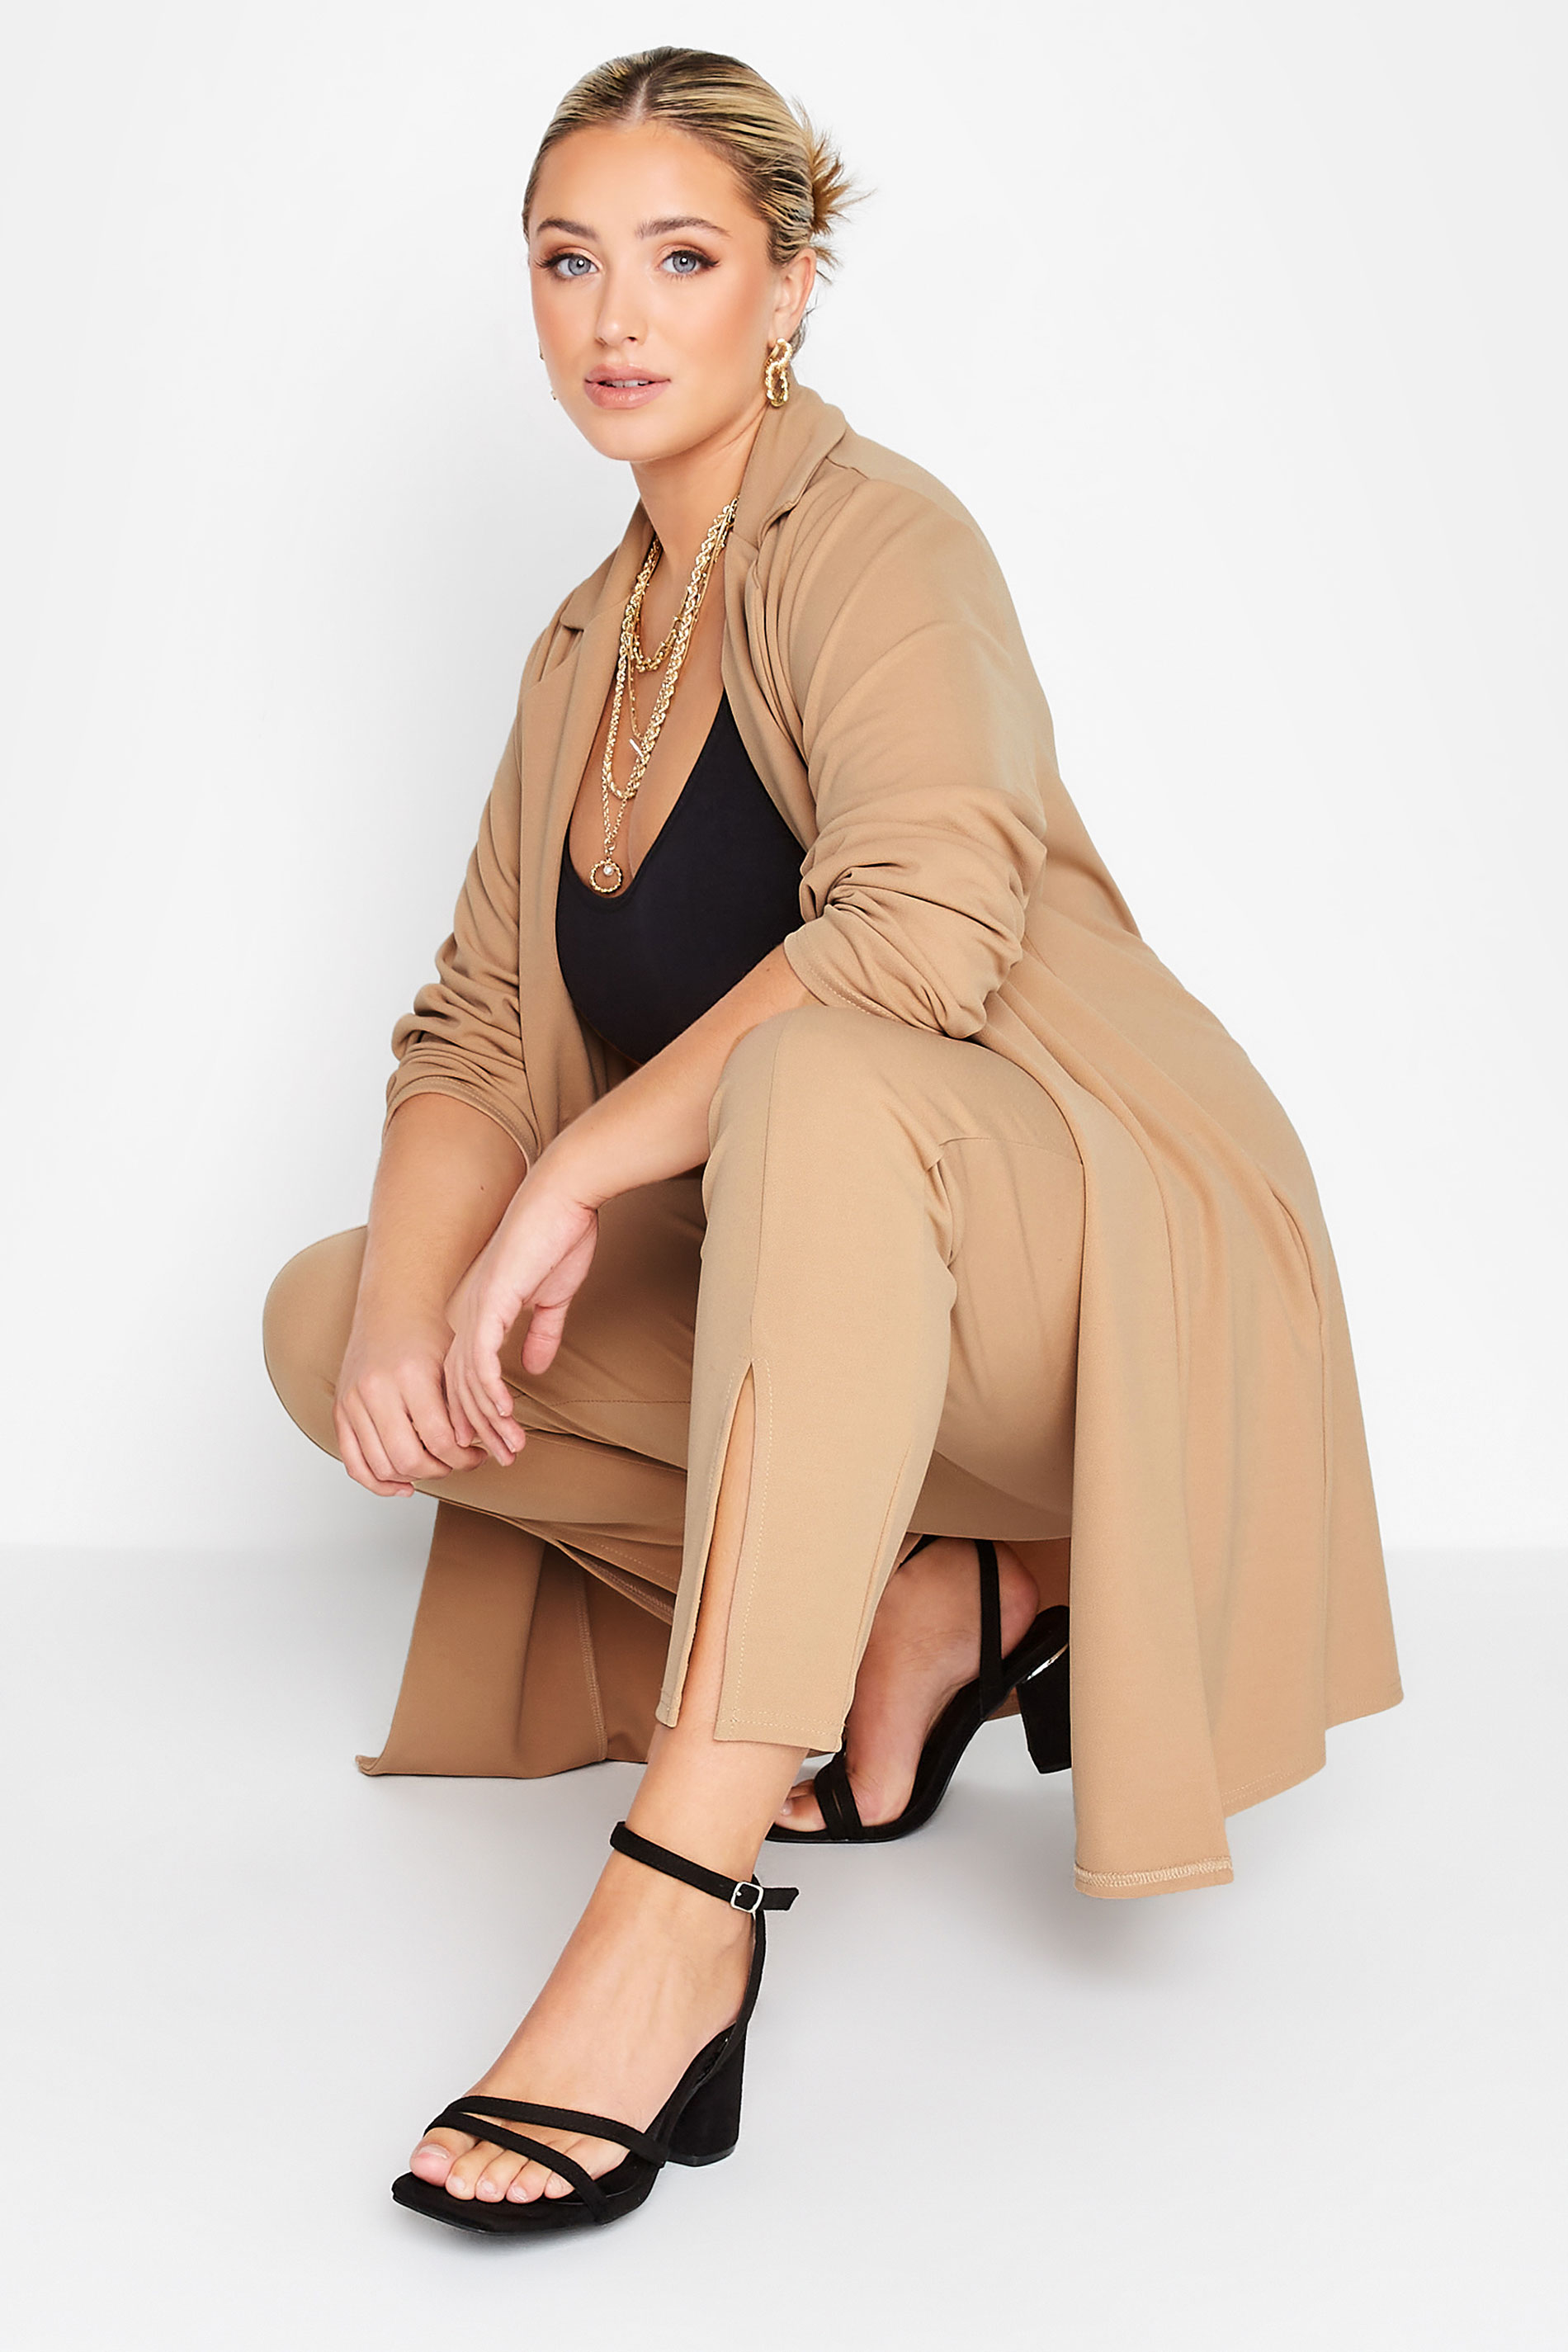 French Connection tapered pants in camel | ASOS